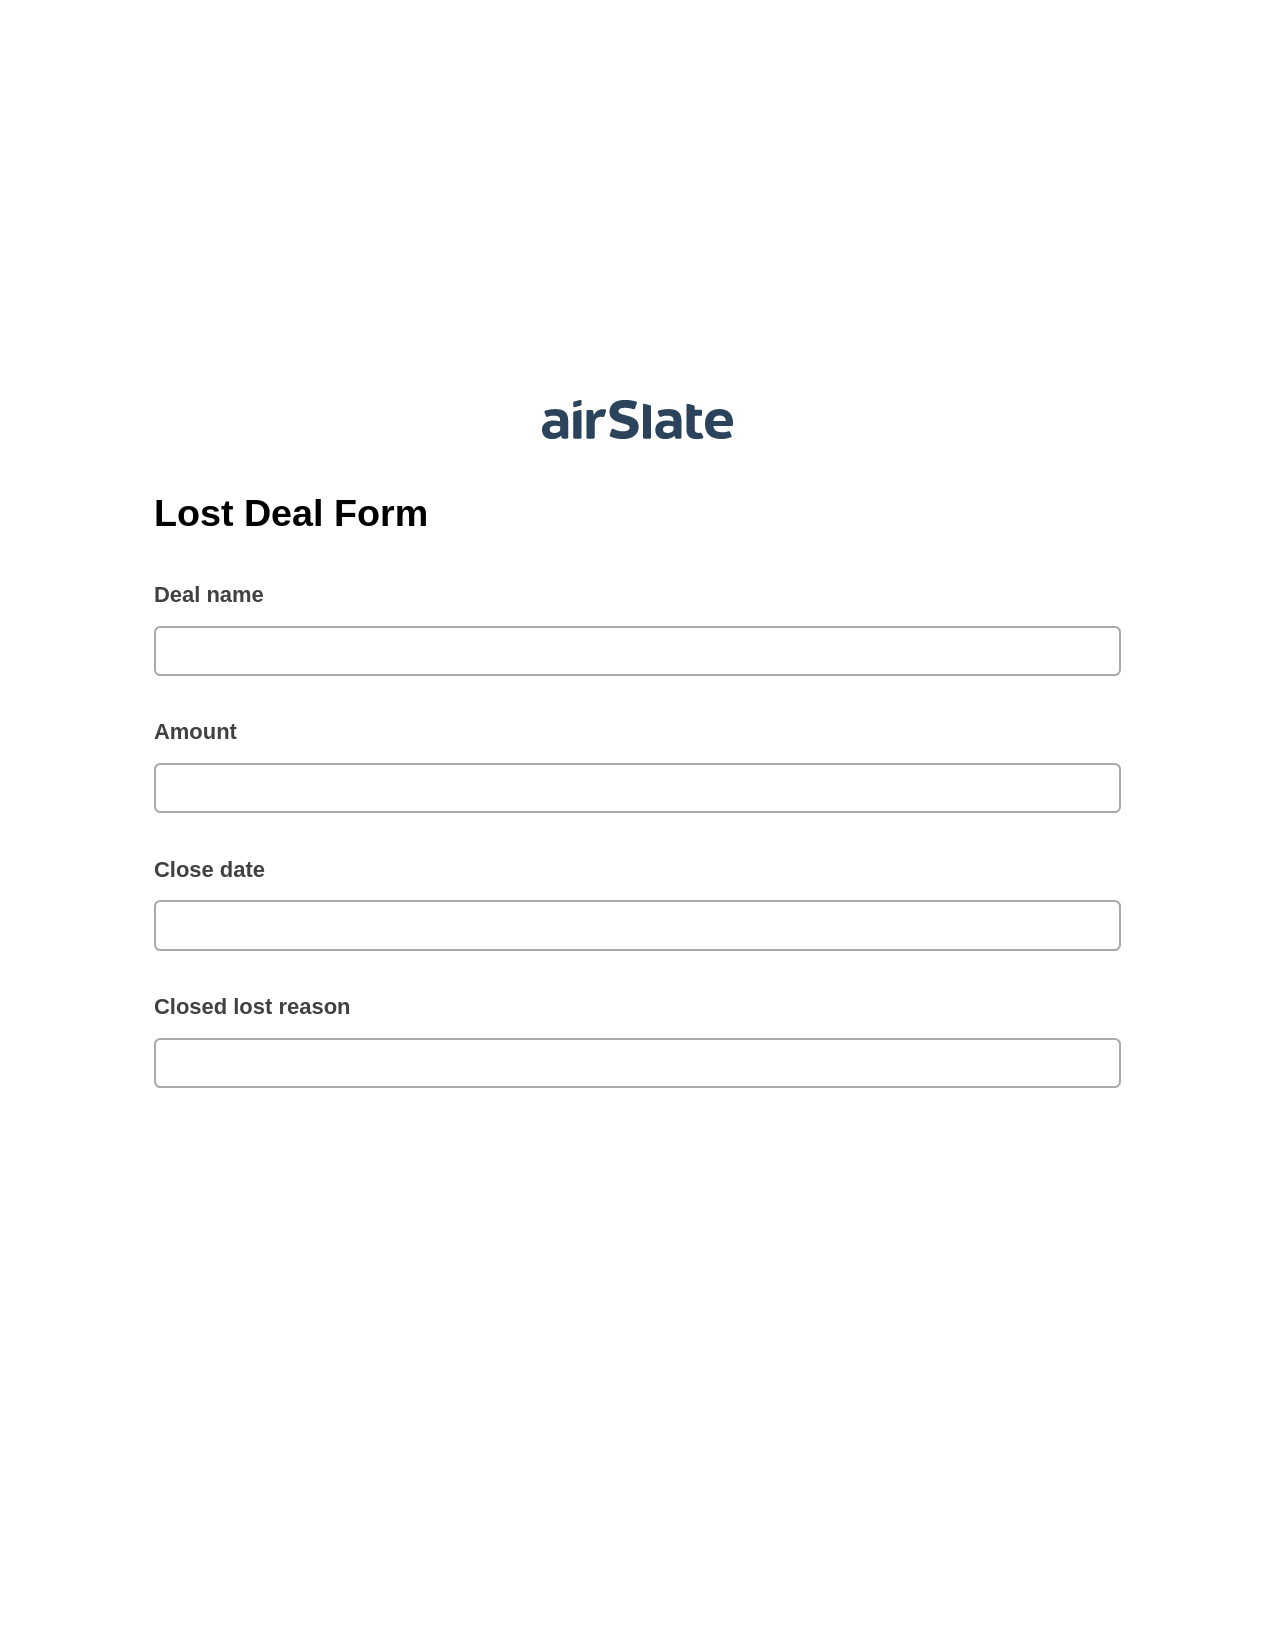 Lost Deal Form Prefill from NetSuite records, Email Notification Bot, Export to NetSuite Bot